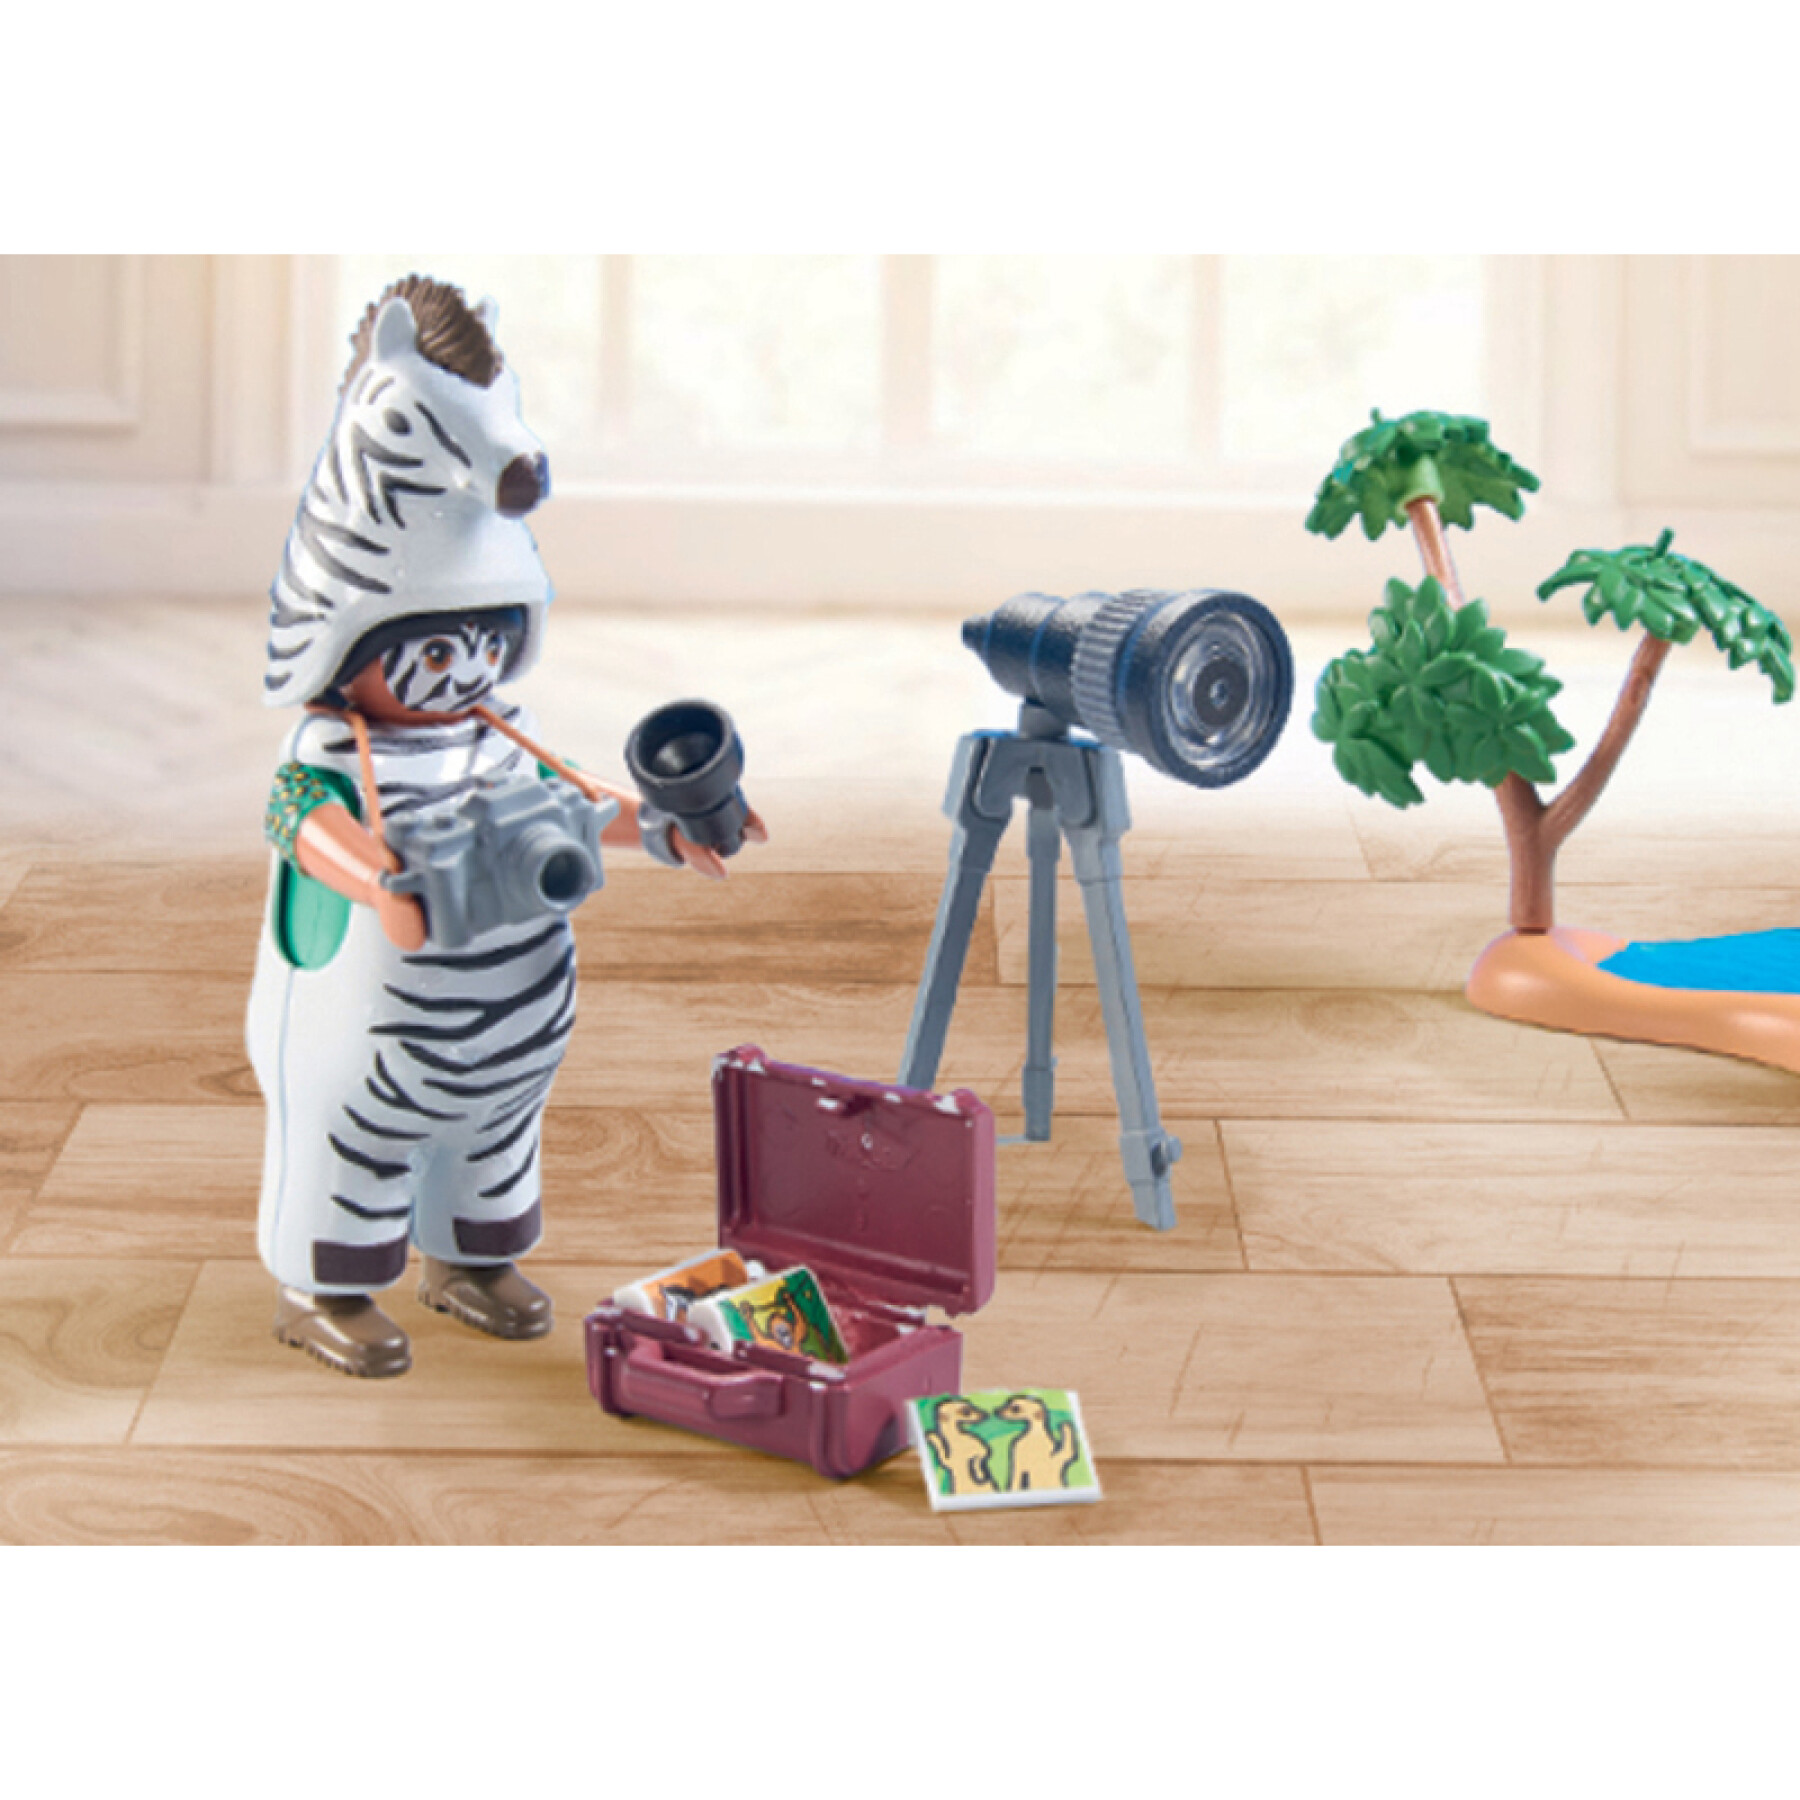 Figurine photographer in disguise and zebras Playmobil